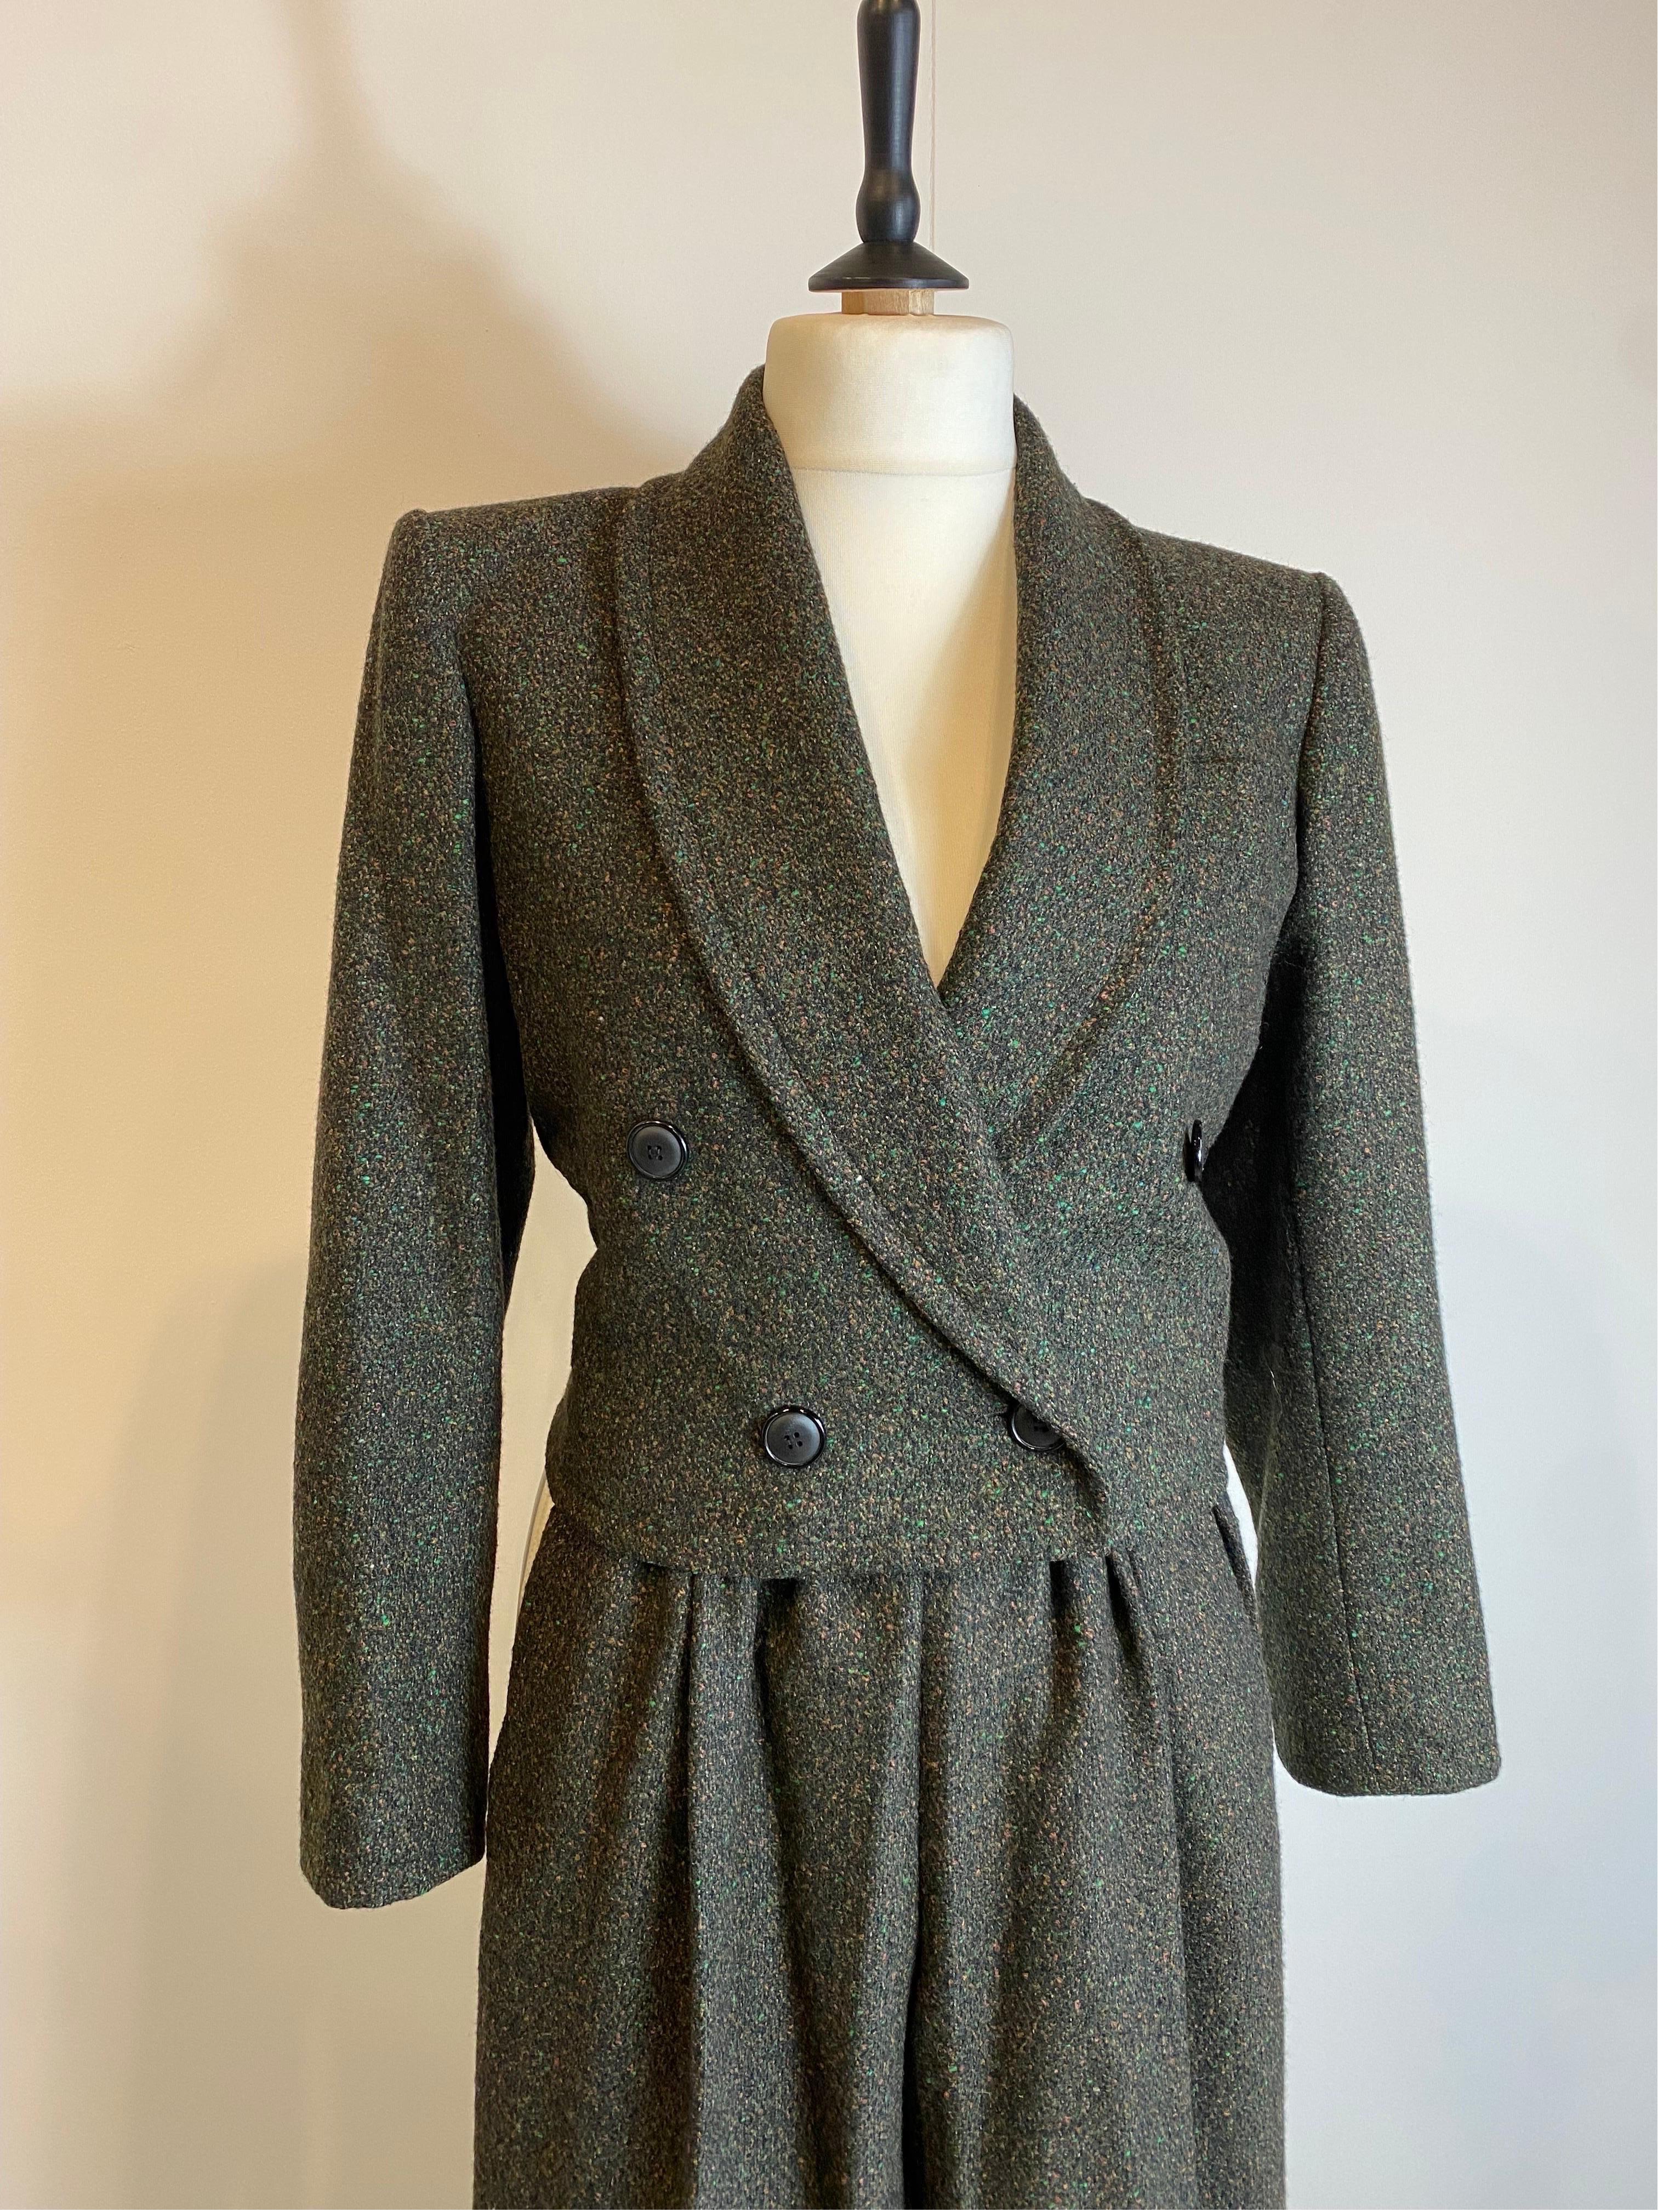 Saint Laurent vintage wool Jacket and Pants Suit In Excellent Condition For Sale In Carnate, IT